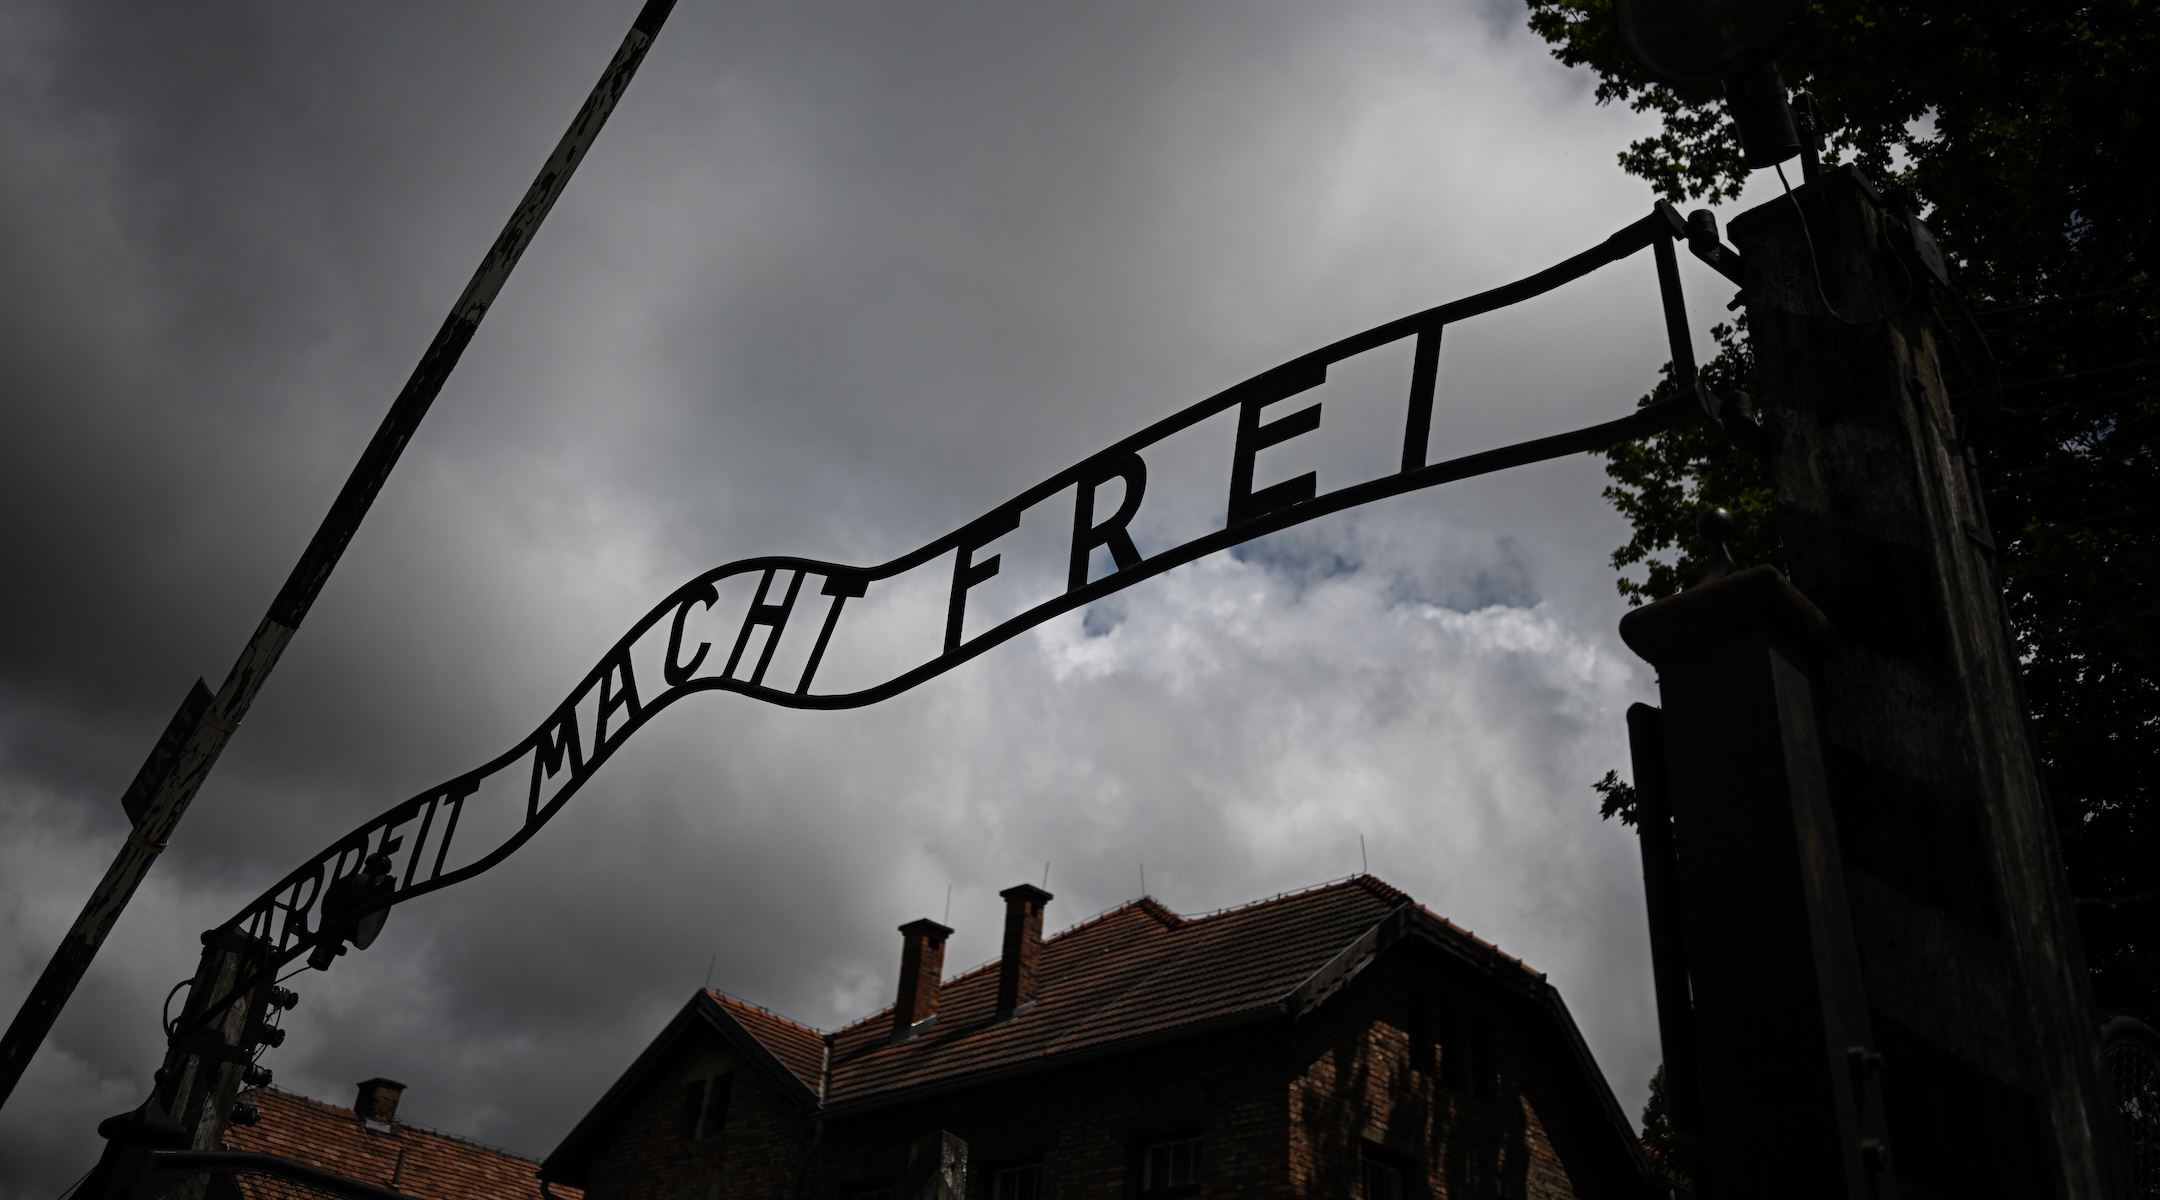 A view of the iconic entrance gate of the Auschwitz concentration camp that reads ‘Arbeit Macht Frei’ (Work Sets You Free) during 83rd anniversary of the first transport of Poles to the Auschwitz camp at Oswiecim, Poland on June 14, 2023. (Omar Marques/Anadolu Agency via Getty Images)